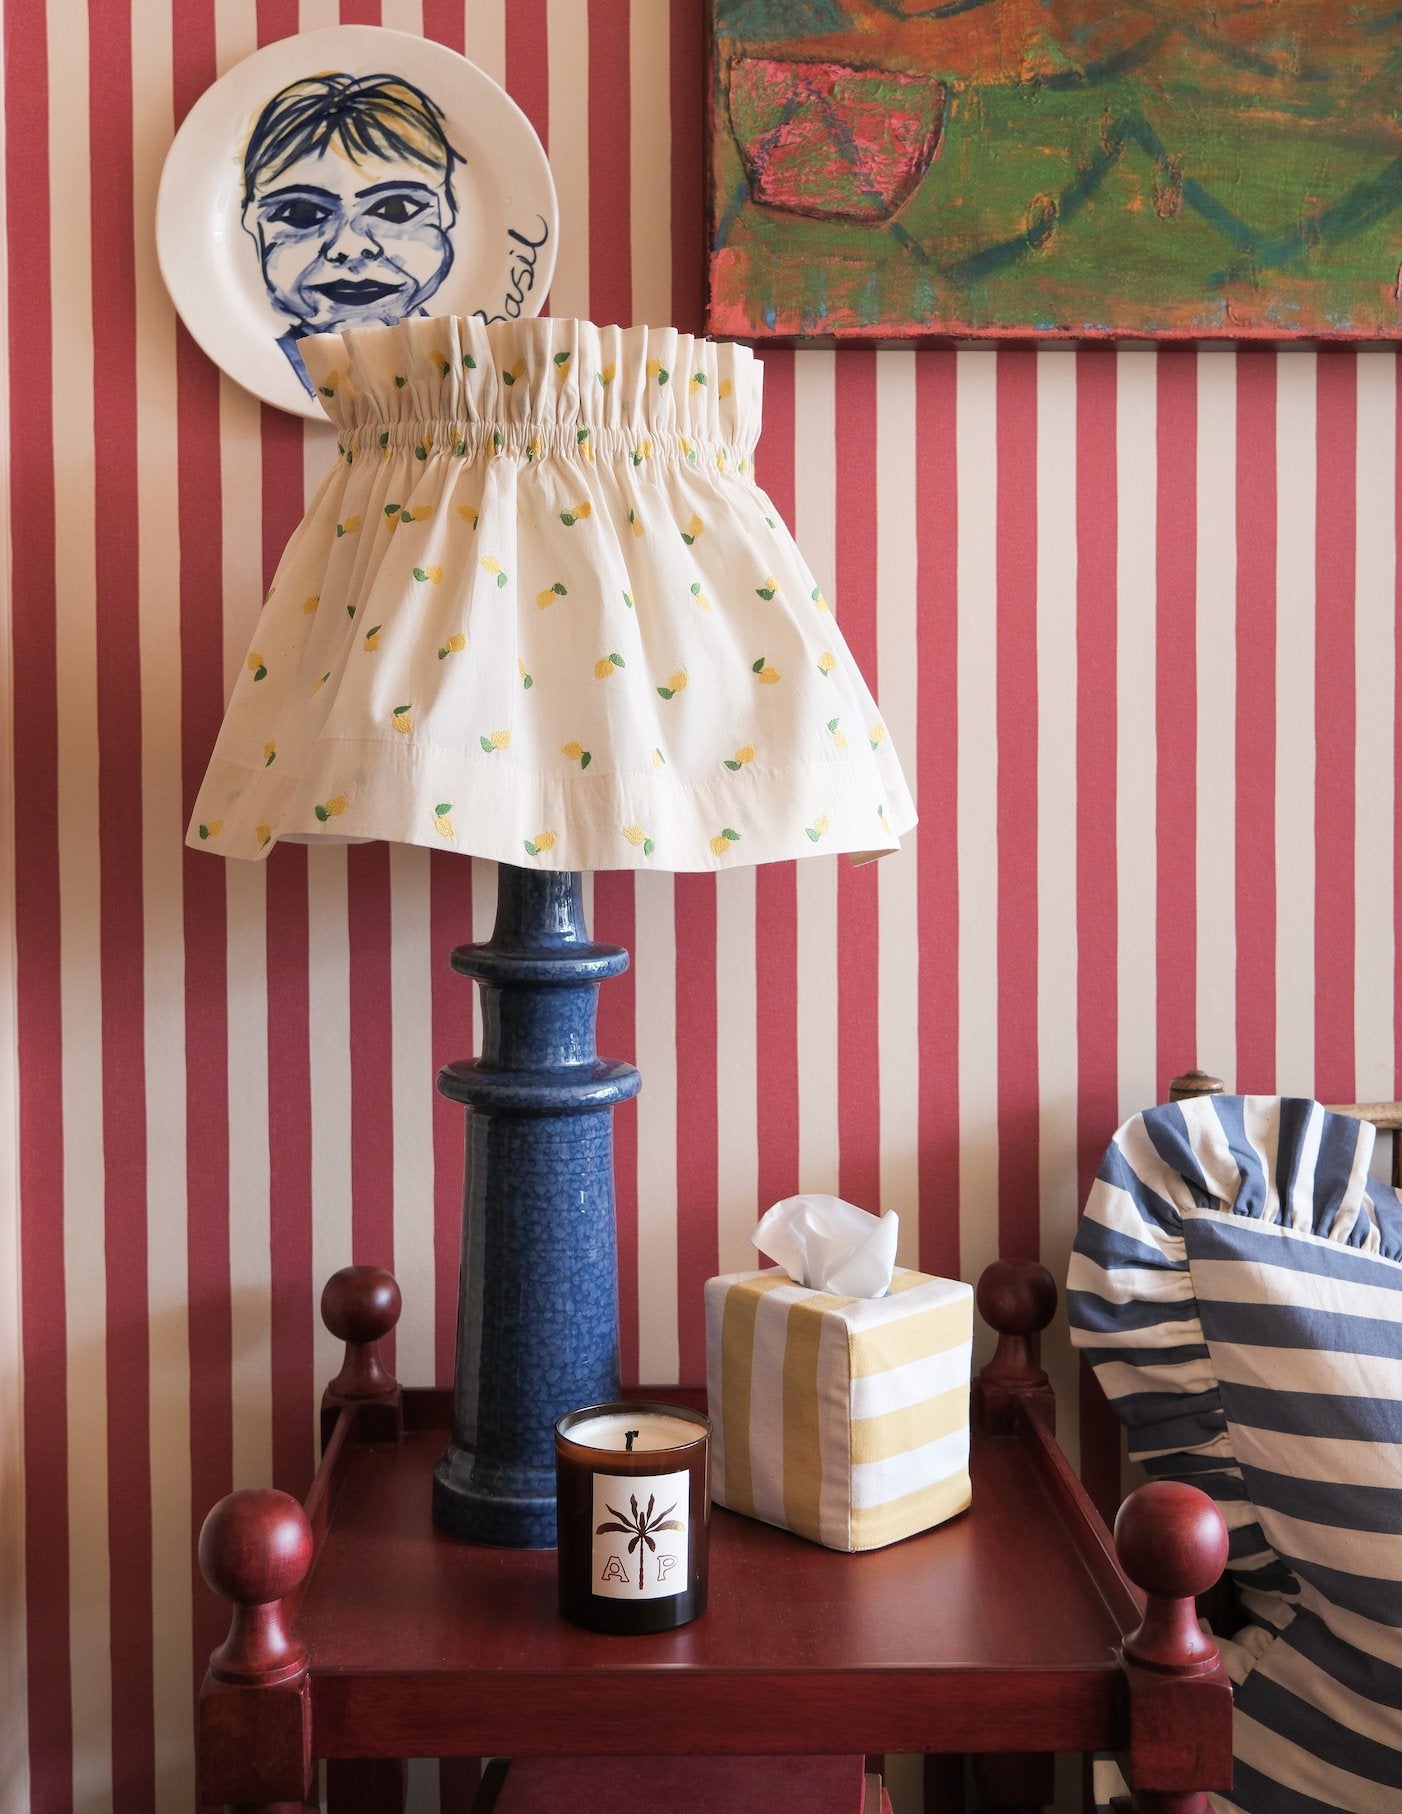 Embroidered Lemon Scrunchie Lampshade - Alice Palmer & Co